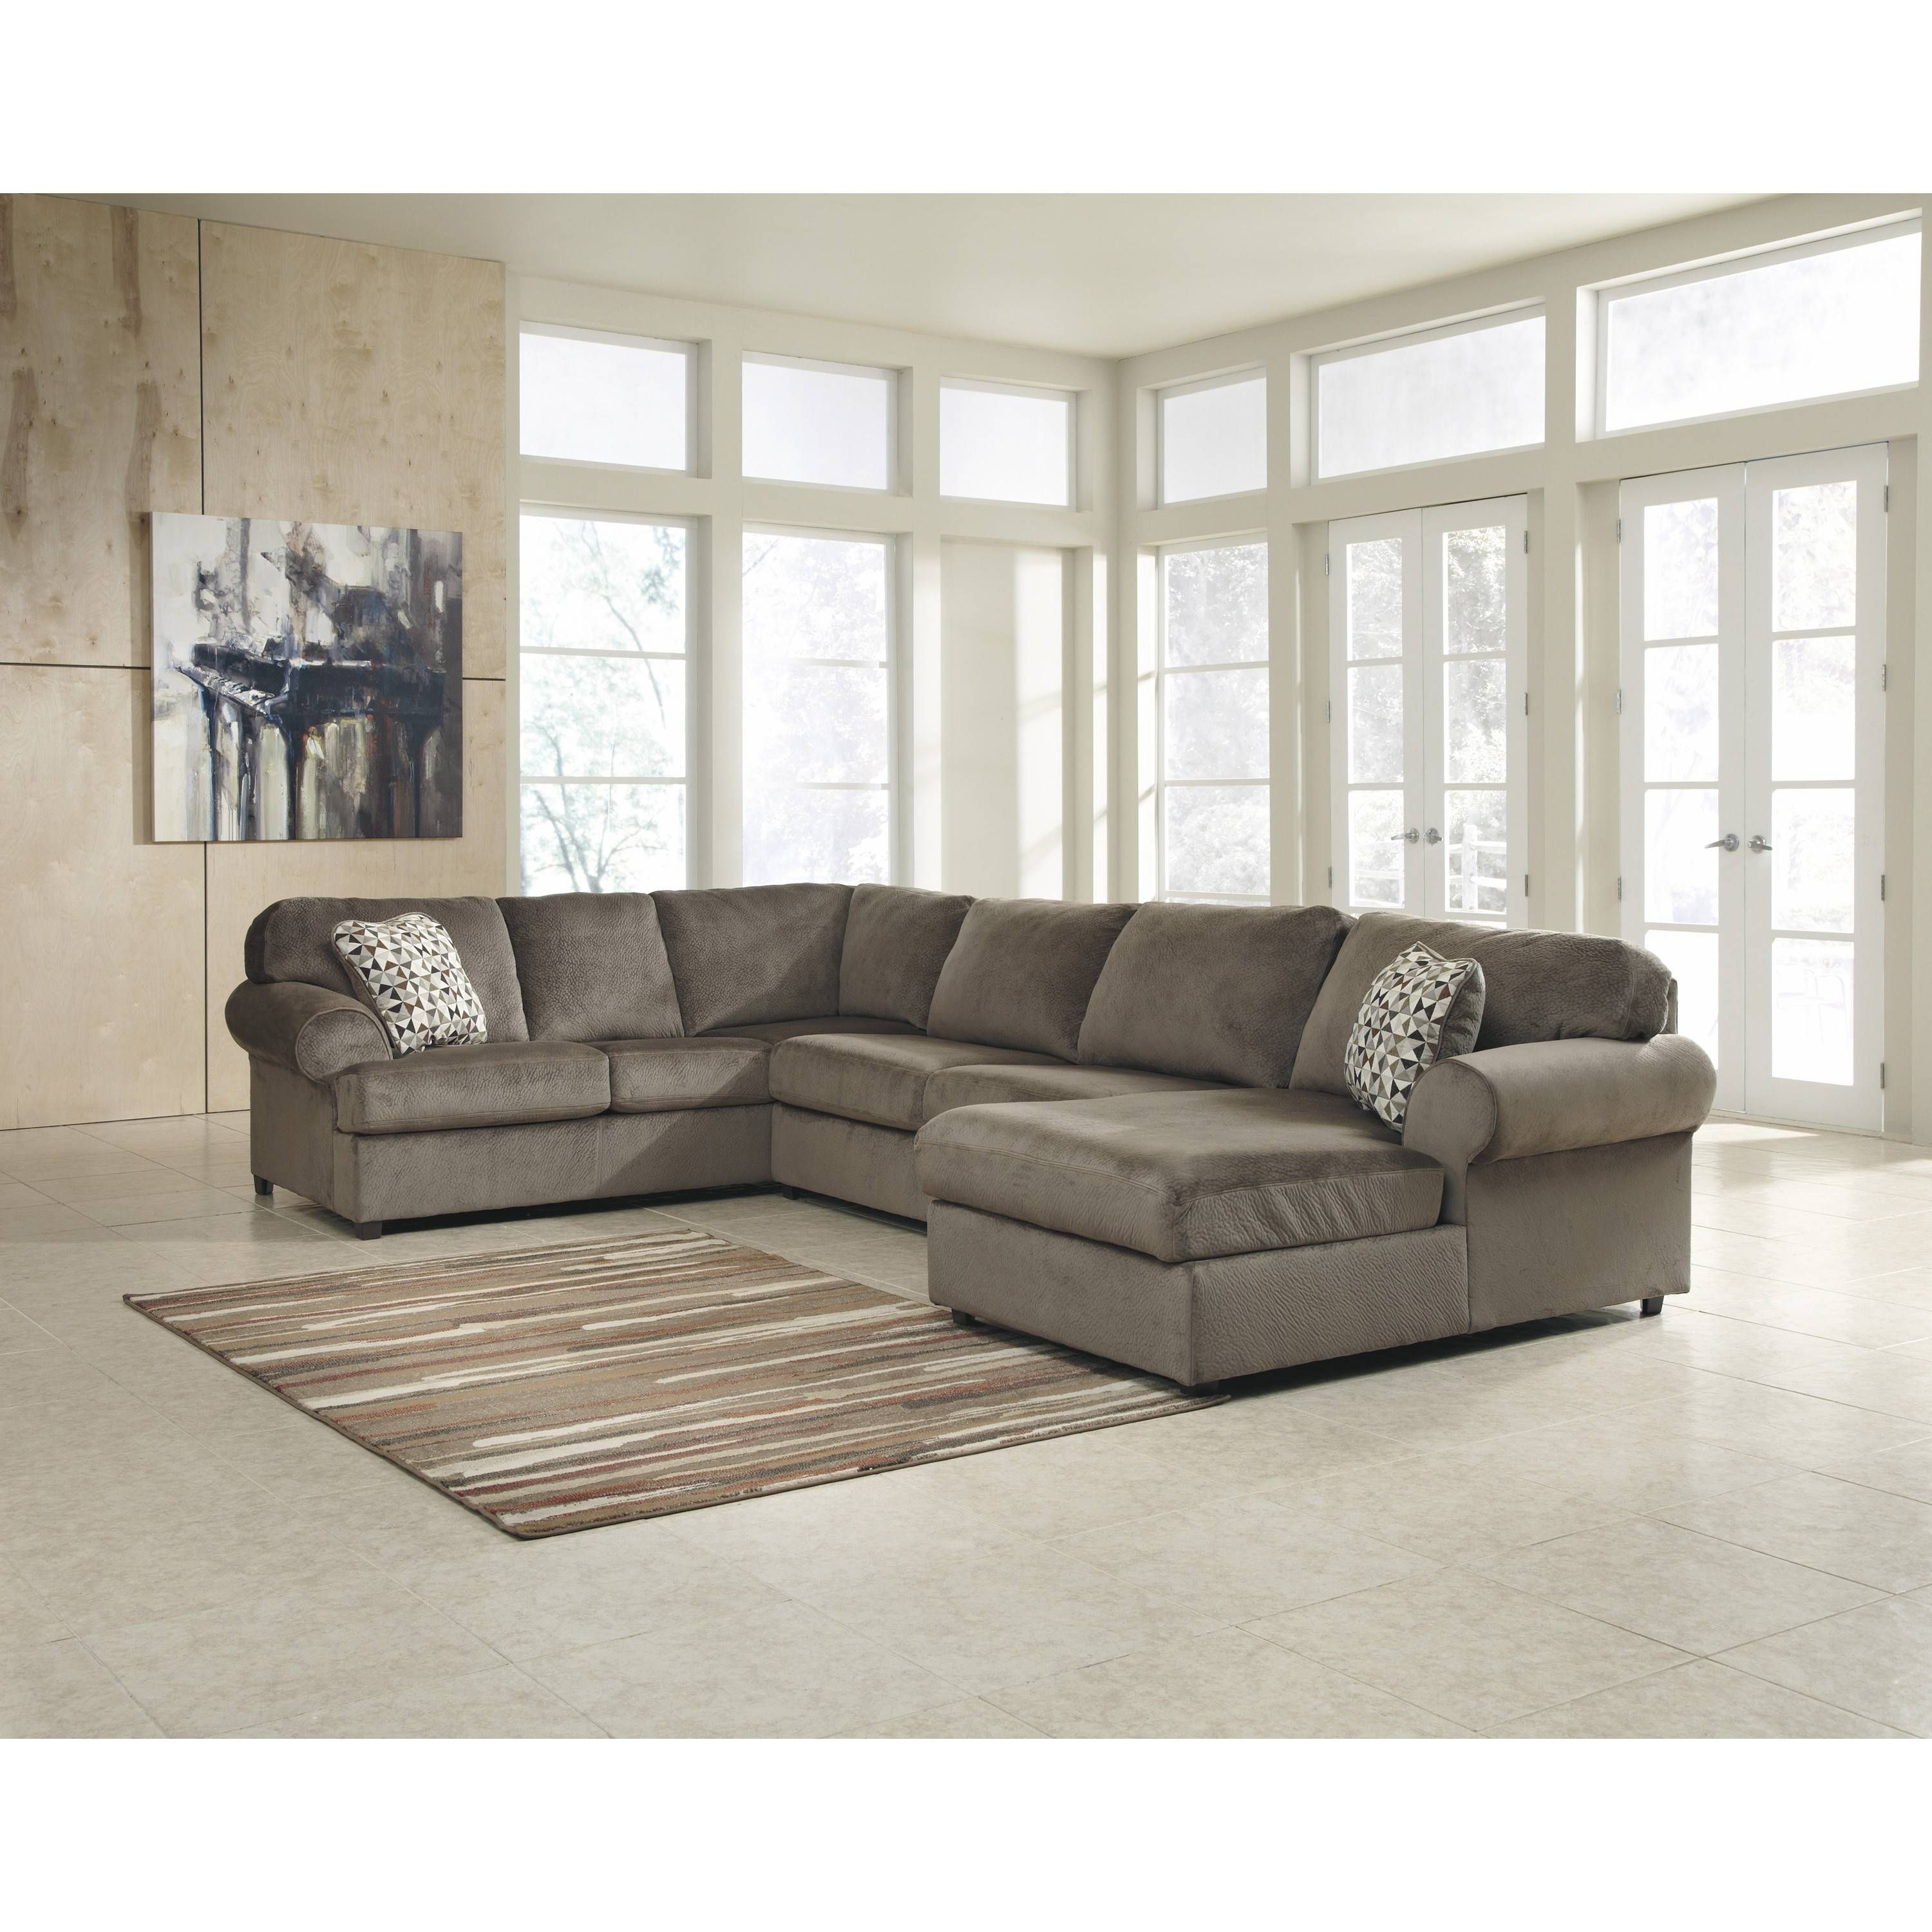 C Shaped Sectional Sofa – Hotelsbacau For C Shaped Sectional Sofa (View 3 of 30)